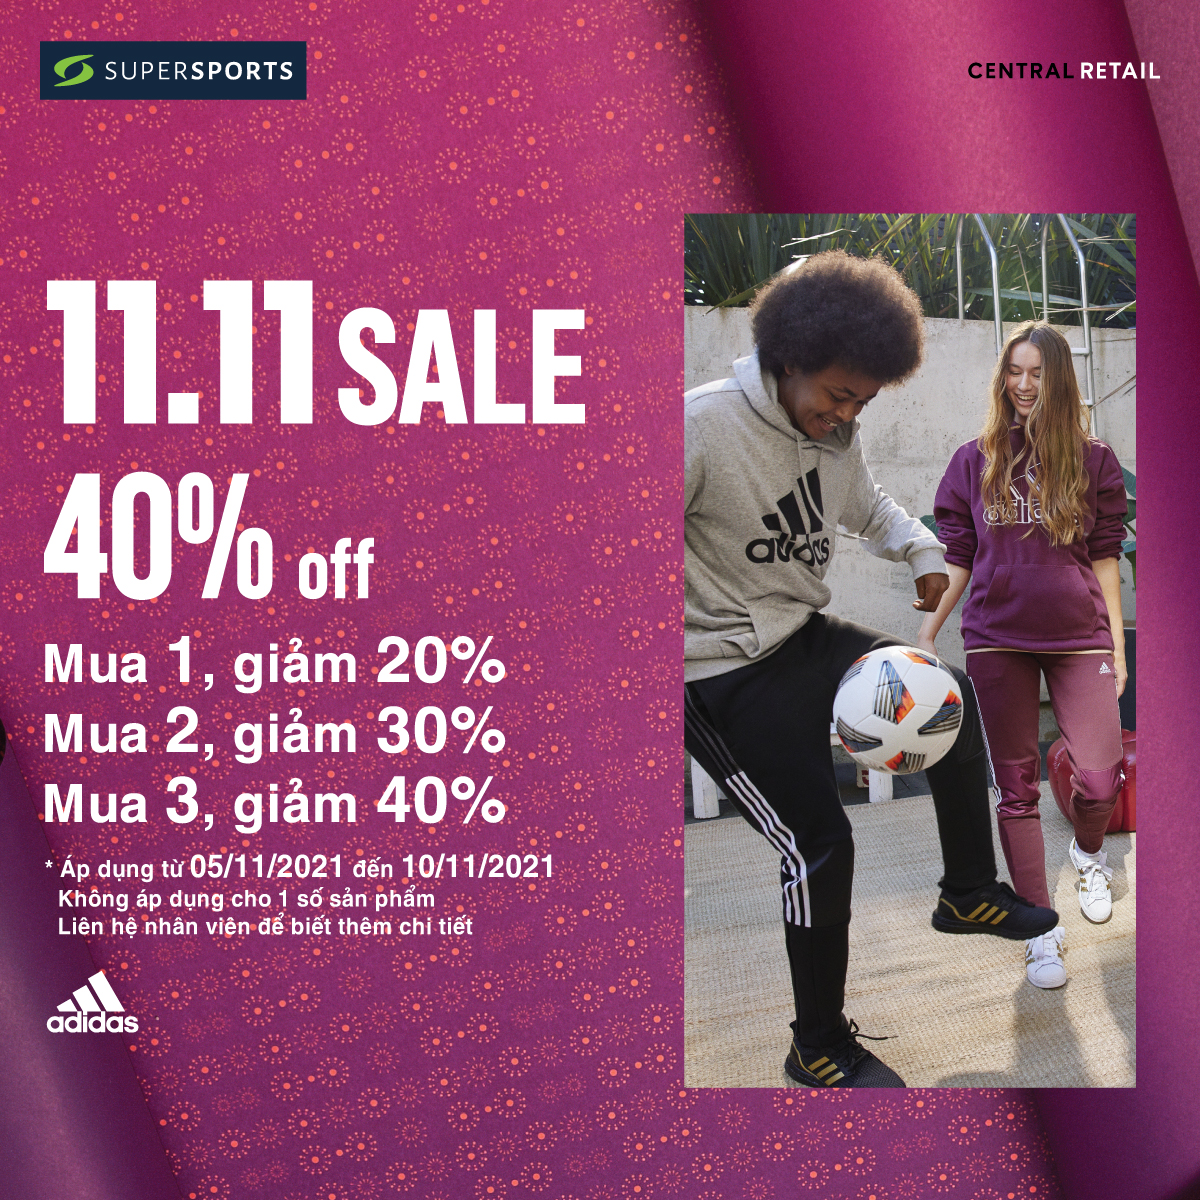 ADIDAS HOT DEAL - SALE UP TO 40%, EXCLUSIVE AT SUPERSPORTS